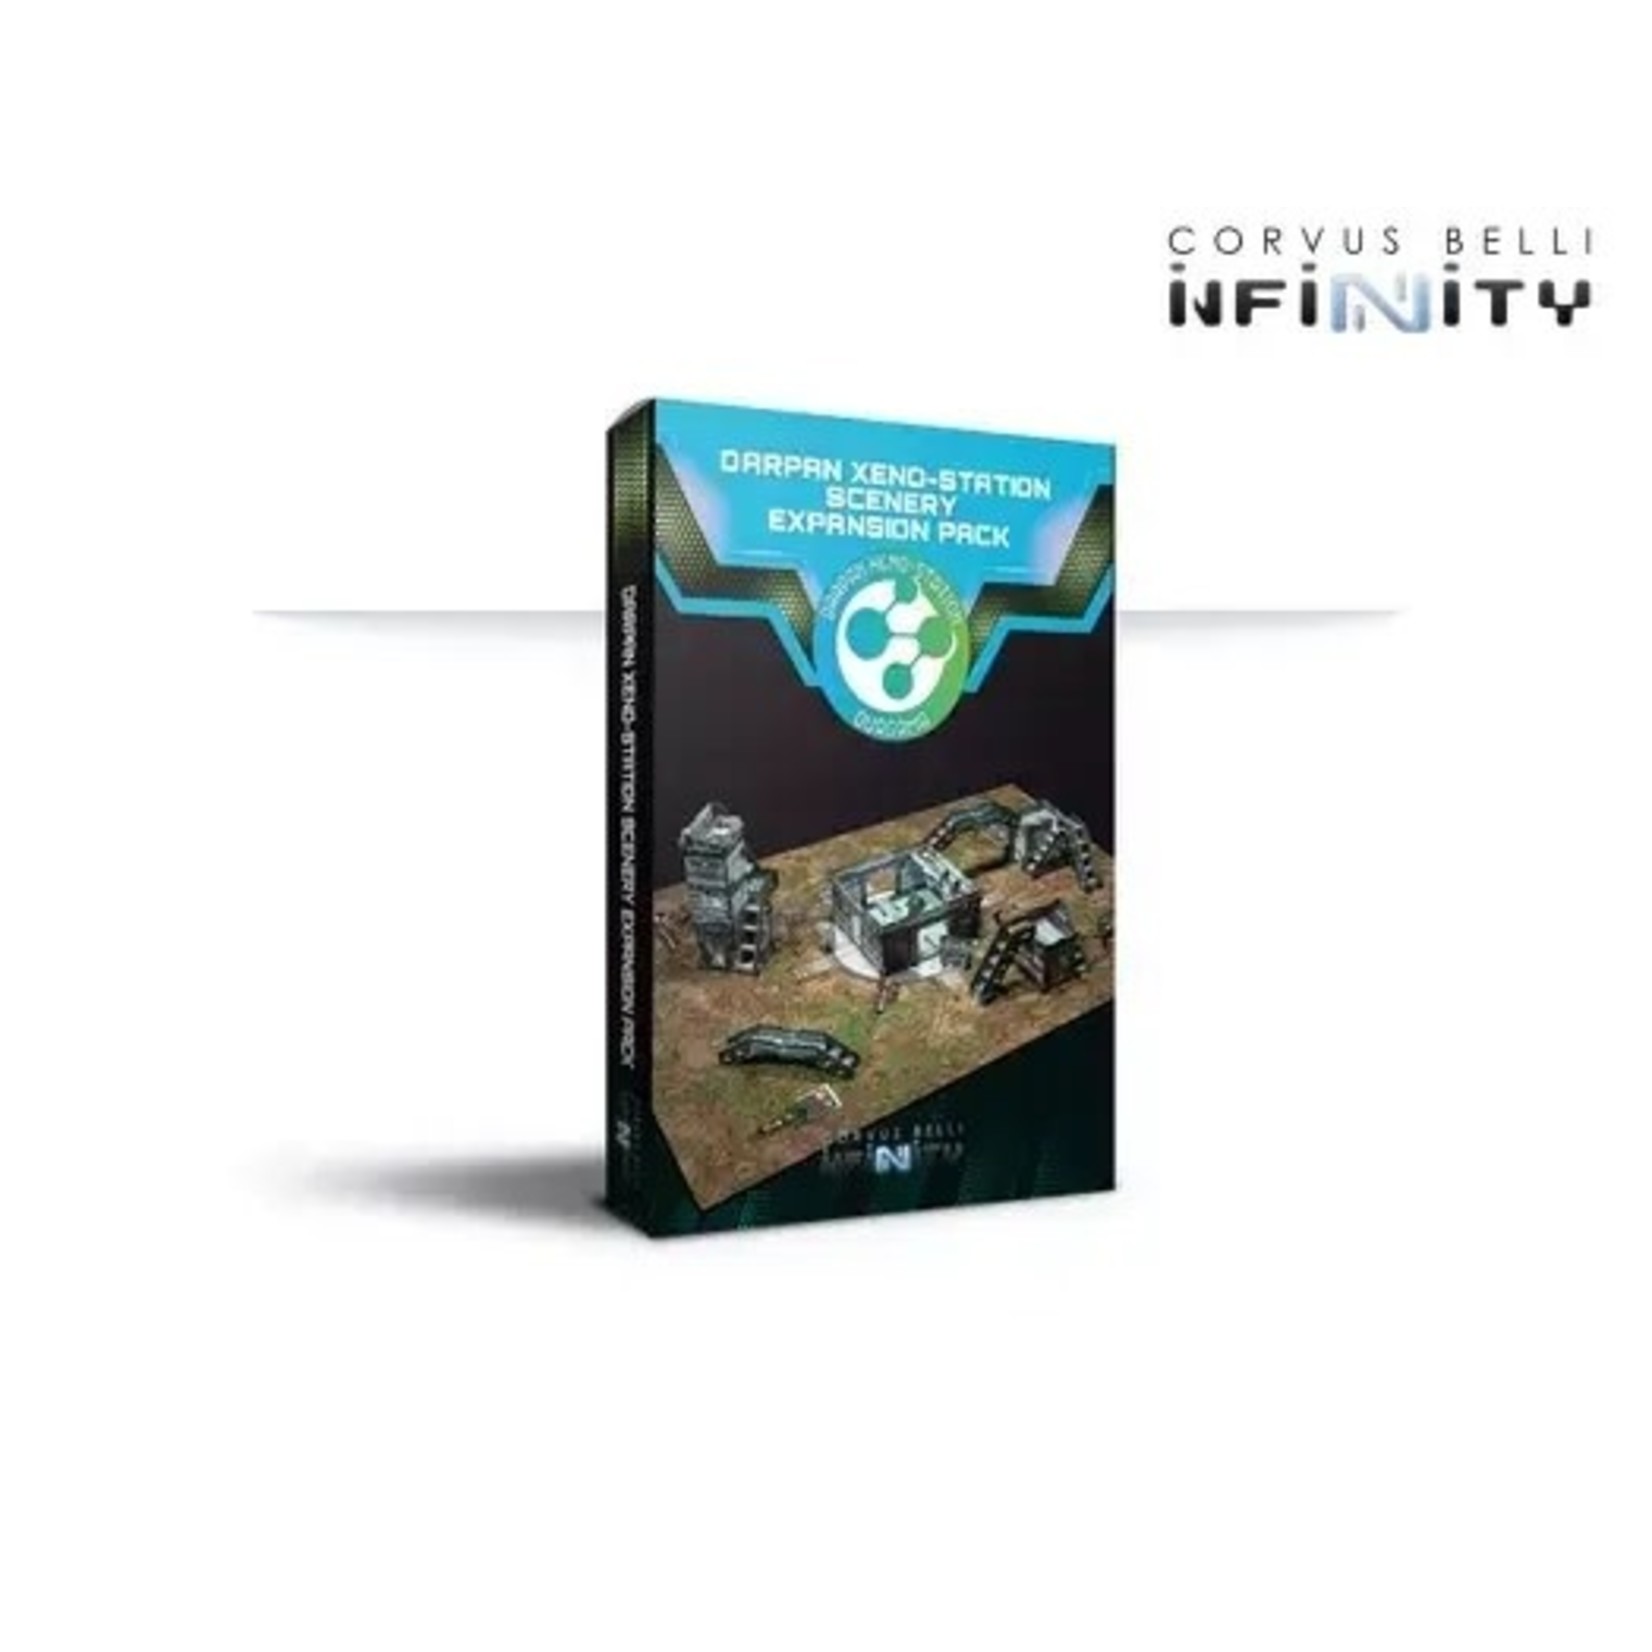 Corvus Belli S.L.L. Infinity Darpan Xeno-Station Scenery Expansion Pack